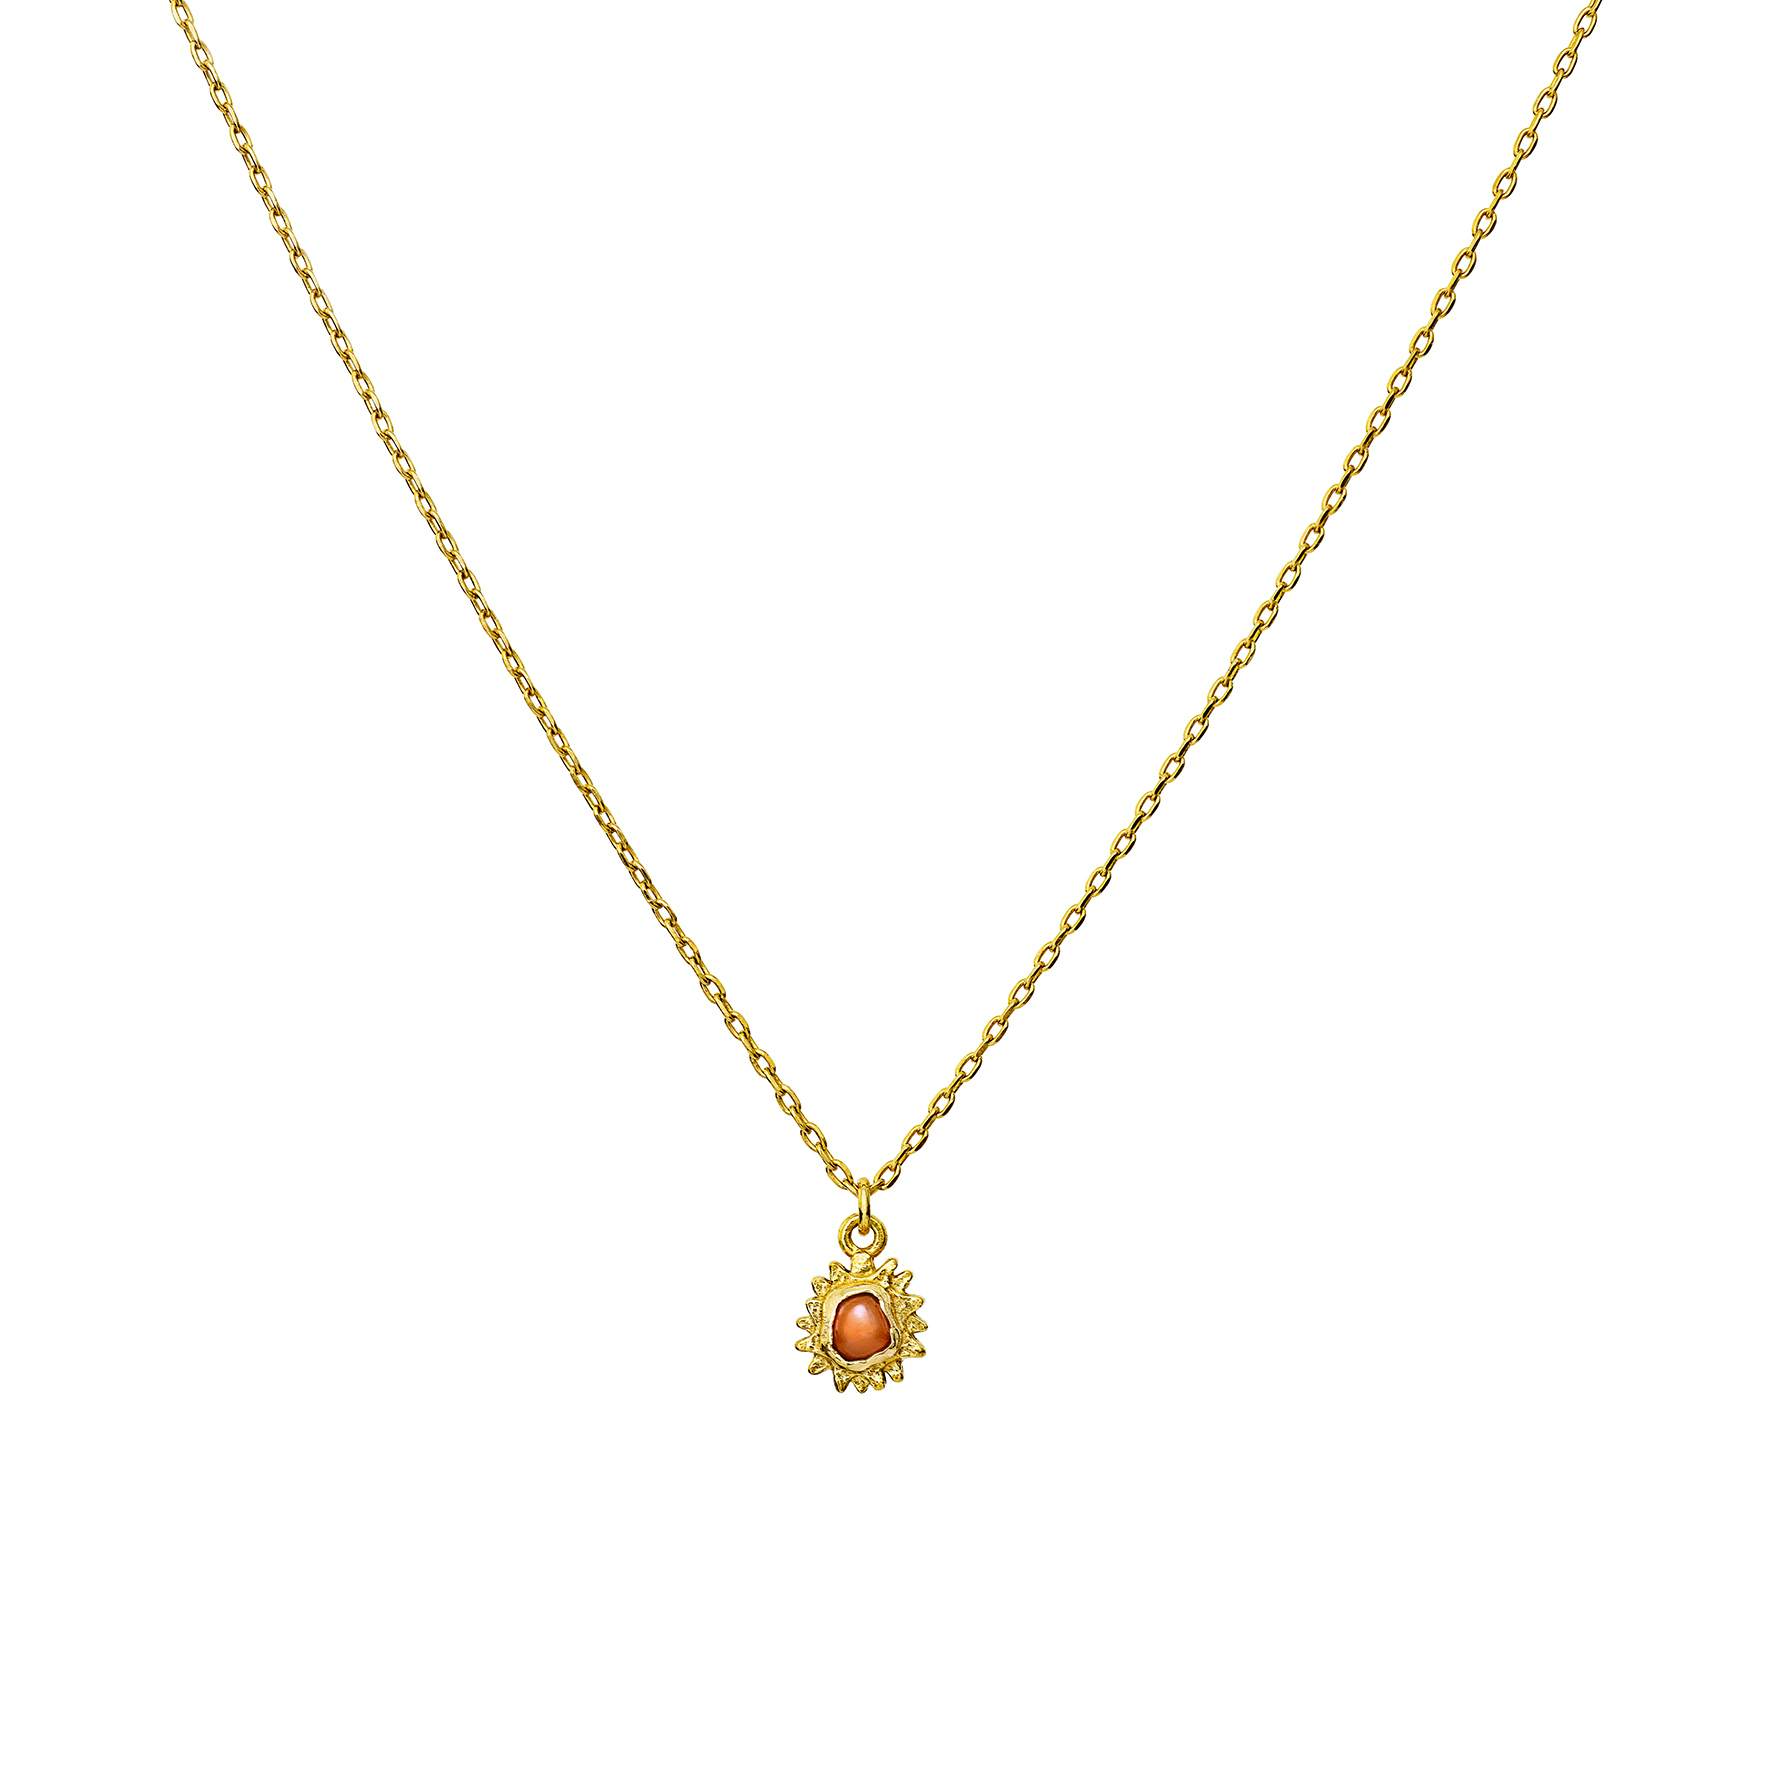 Hania Necklace from Maanesten in Goldplated-Silver Sterling 925